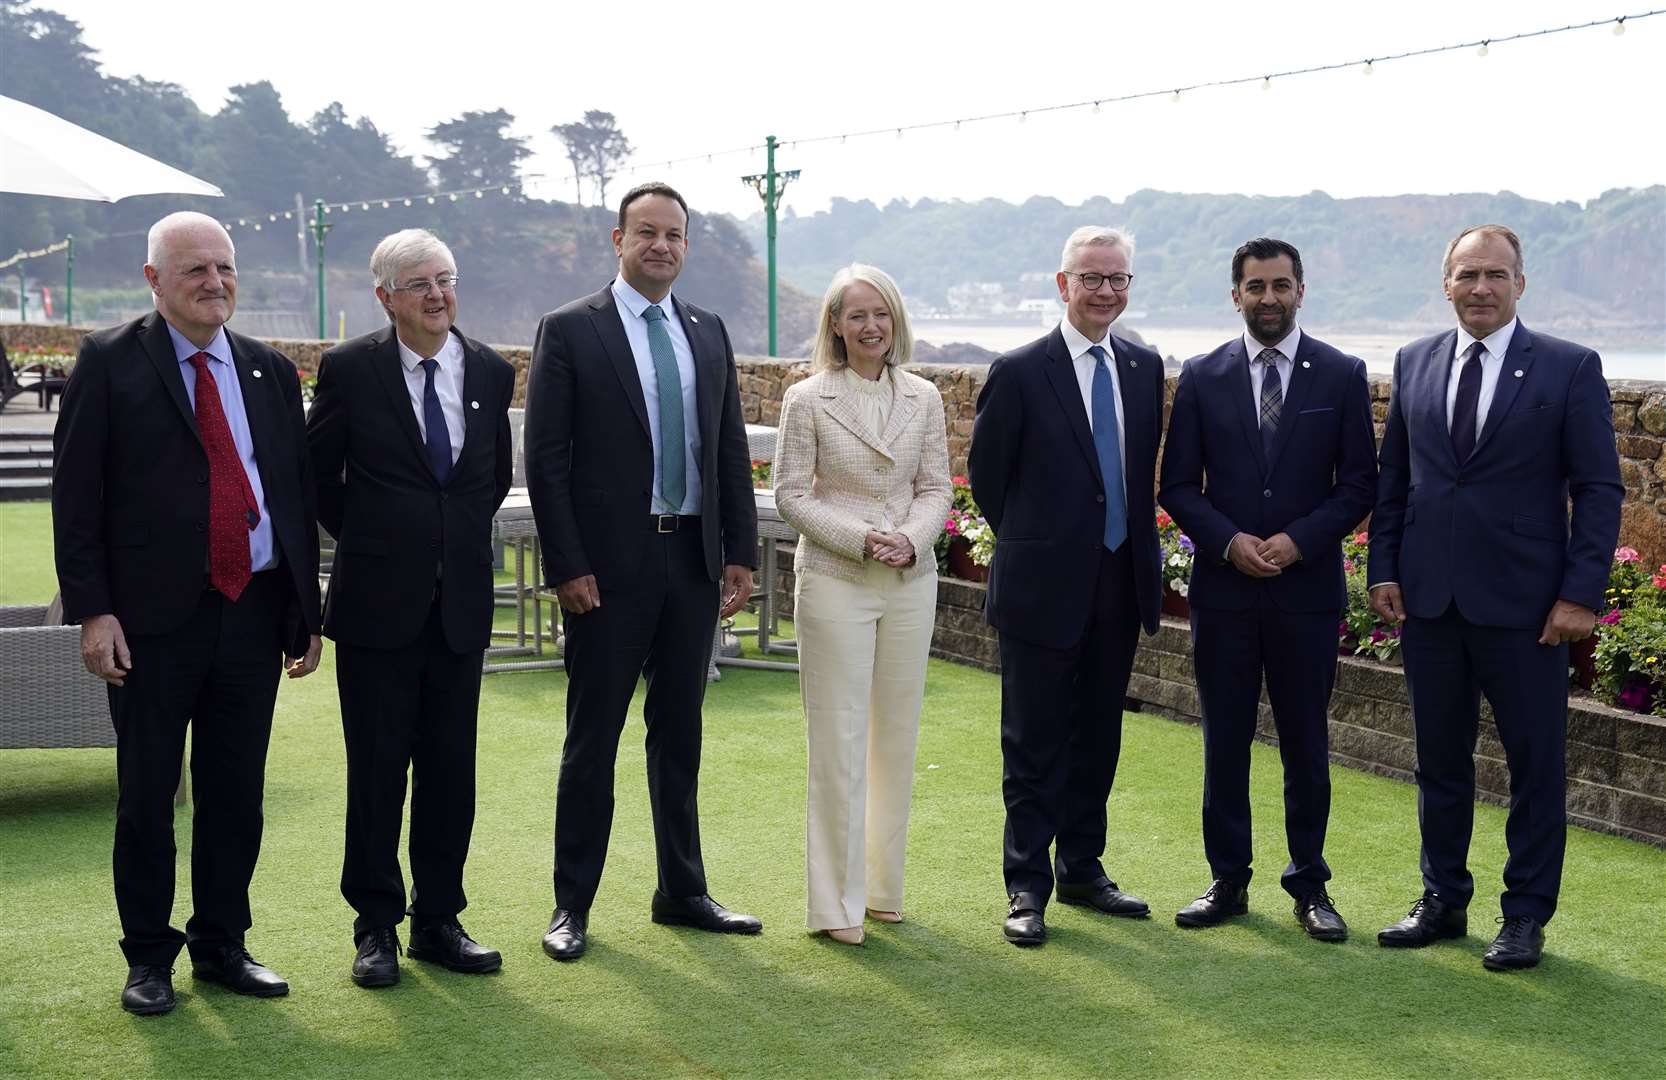 Chief Minister of Guernsey Peter Ferbrache, First Minister of Wales Mark Drakeford, Taoiseach Leo Varadkar, Chief Minister of Jersey Kristina Moore, UK Cabinet minister Michael Gove, First Minister of Scotland Humza Yousaf and Chief Minister of the Isle of Man Alfred Cannon at the British-Irish Council summit meeting at the L’Horizon Hotel in St Brelade’s Bay, Jersey. (Andy Matthews/PA)